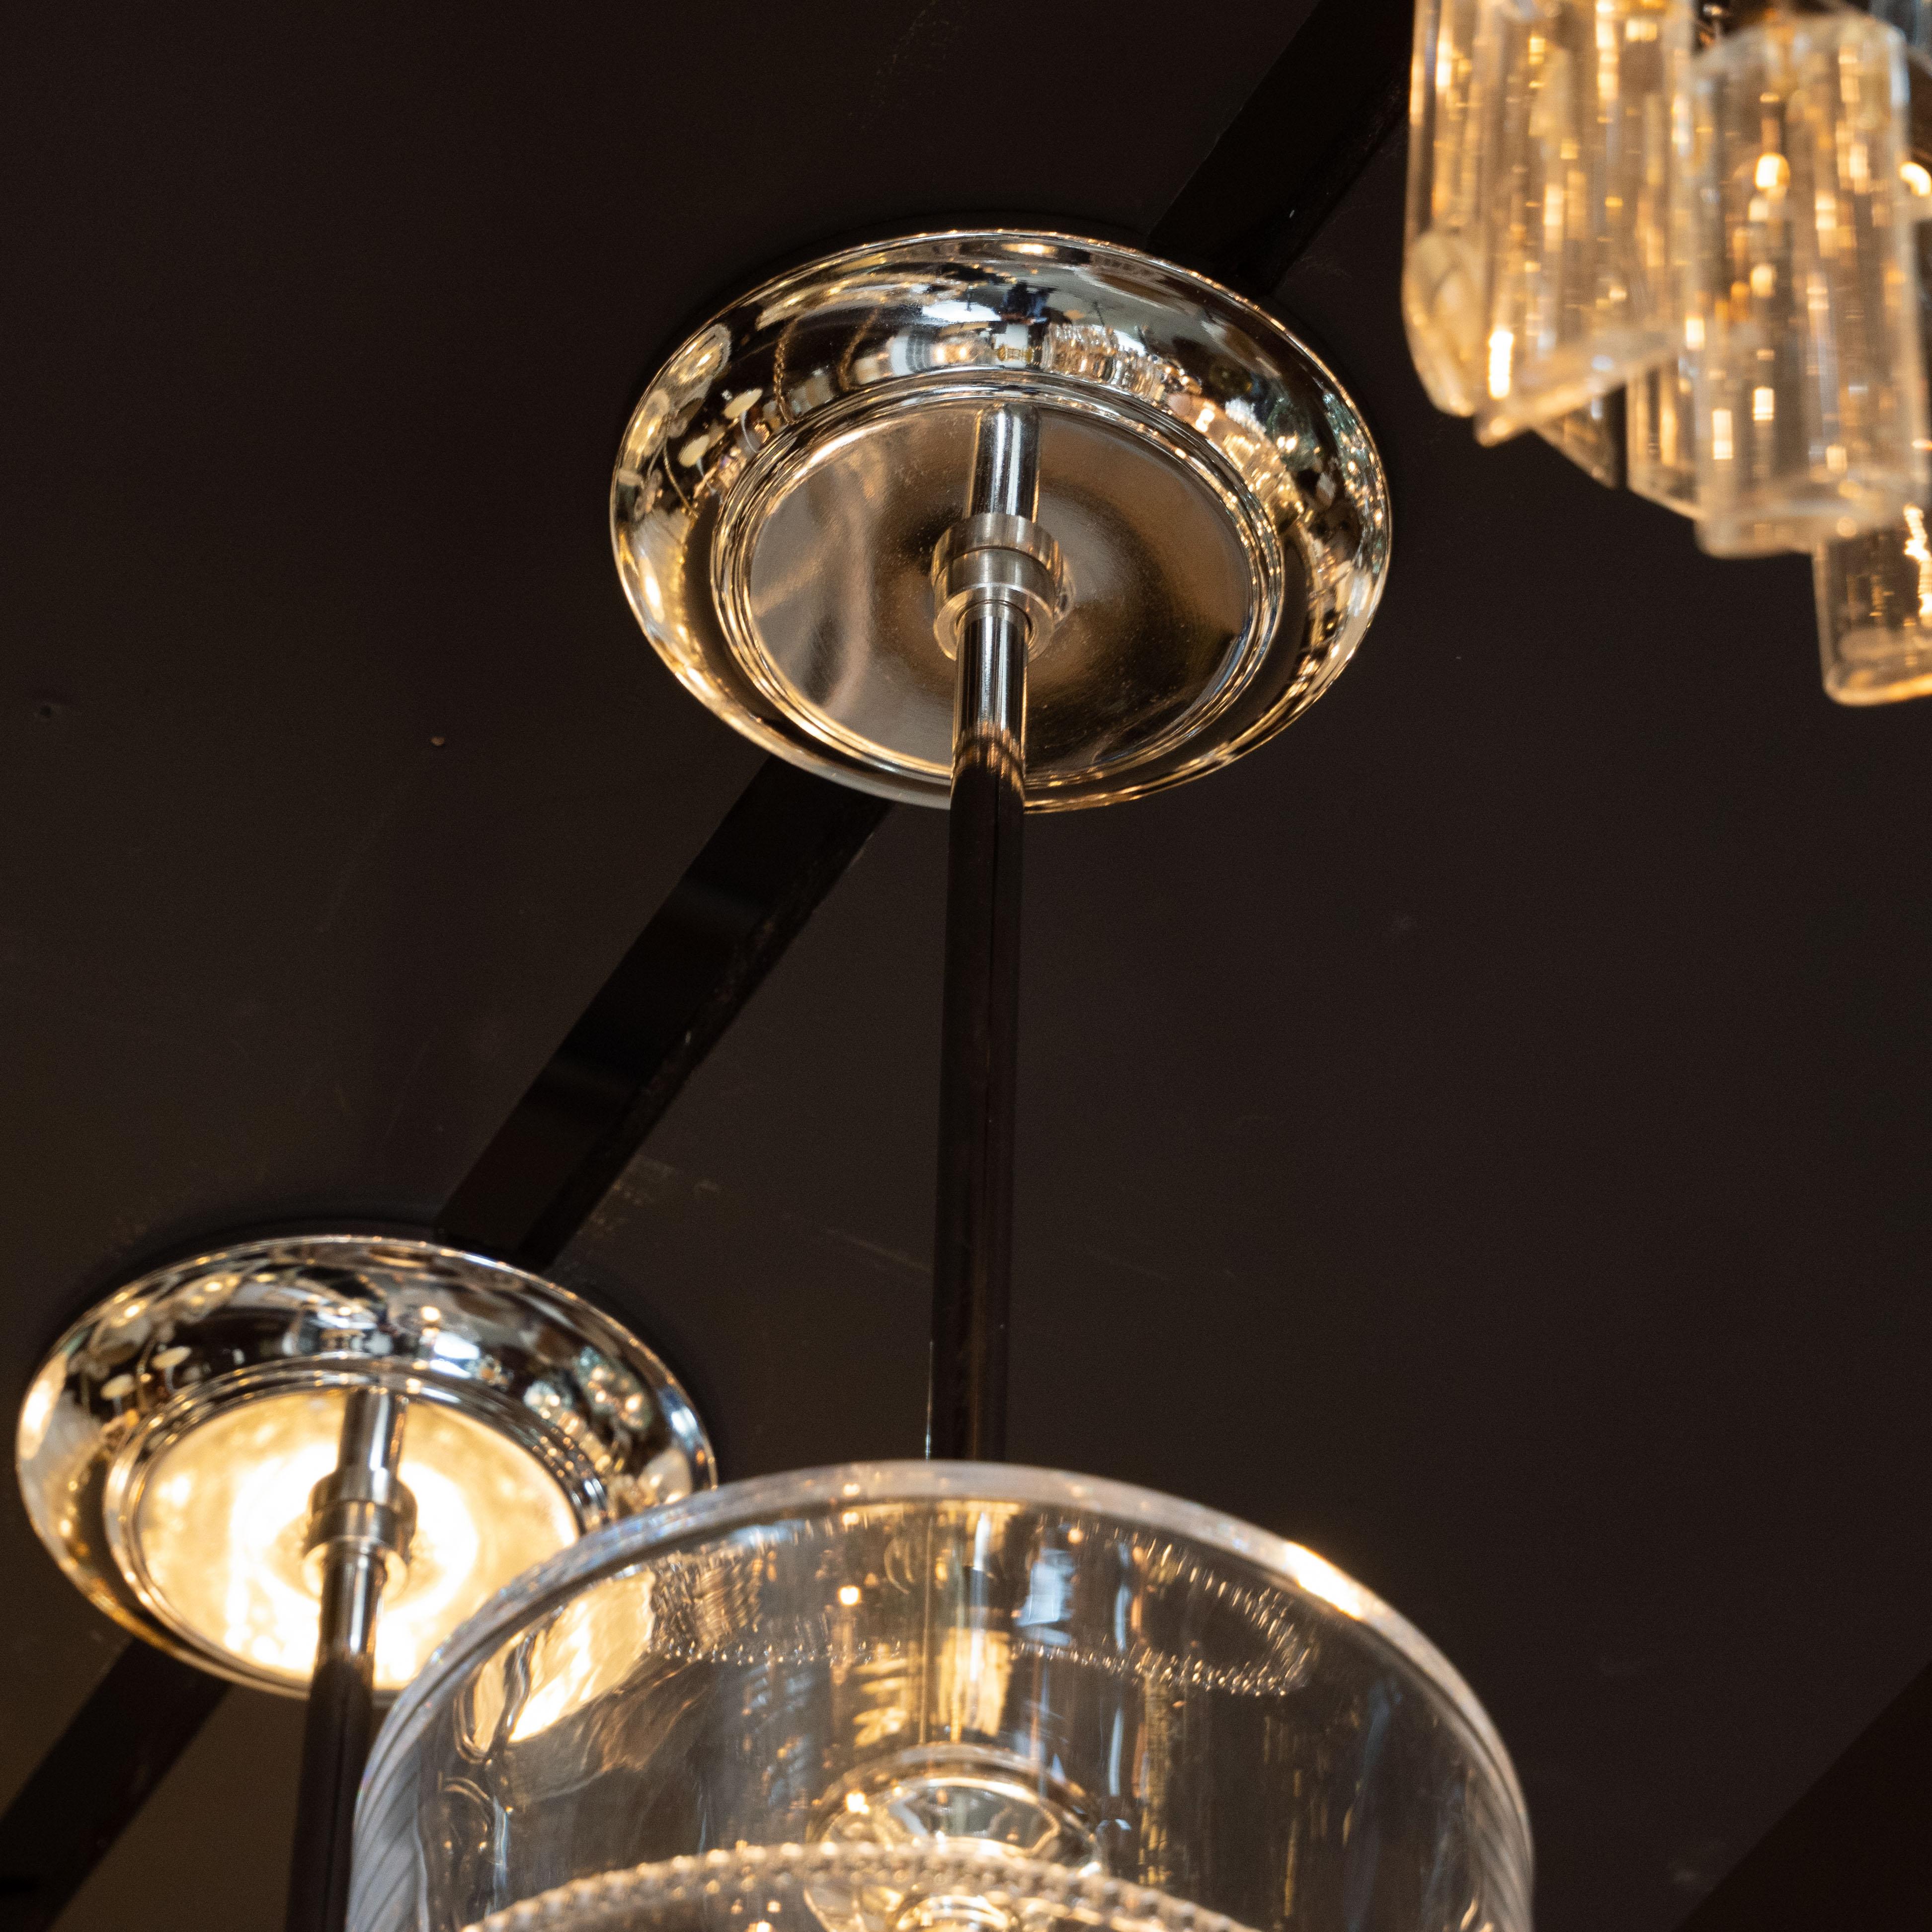 20th Century Pair of Modernist Handblown Translucent Glass Pendants with Chrome Fittings